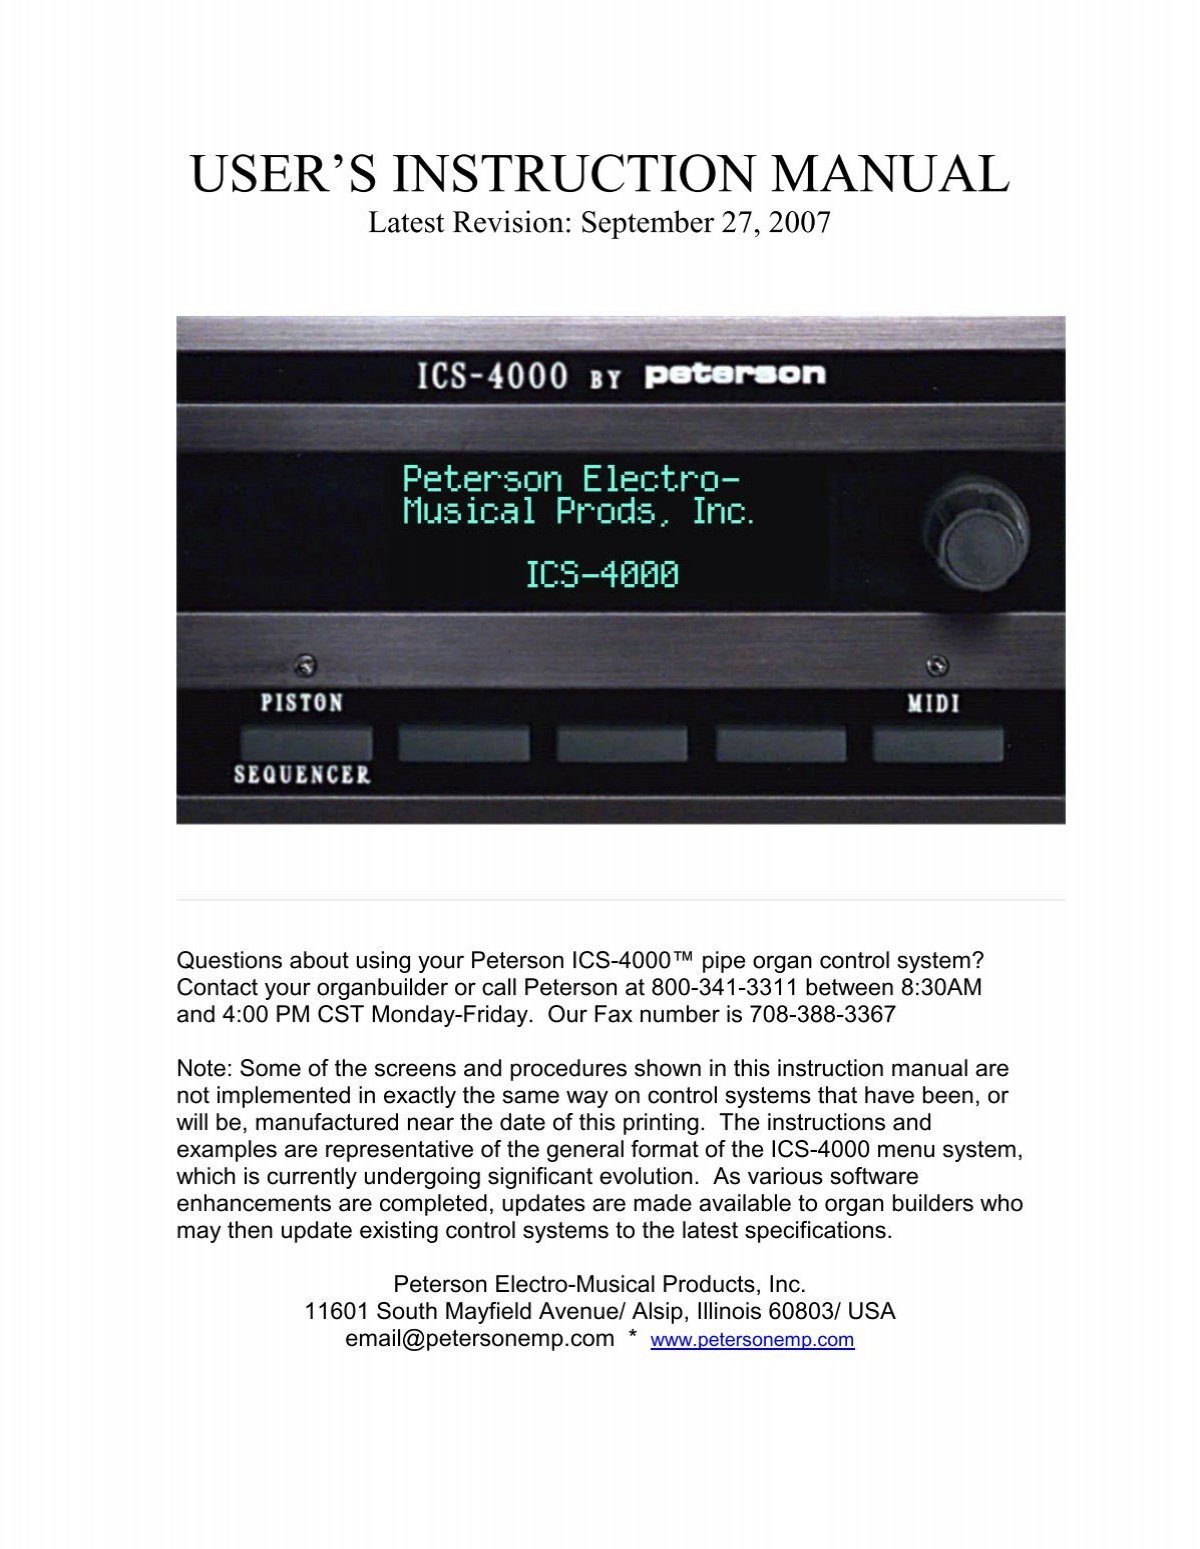 ICS User Instructions 09-27-07.pdf - Peterson Electro-Musical